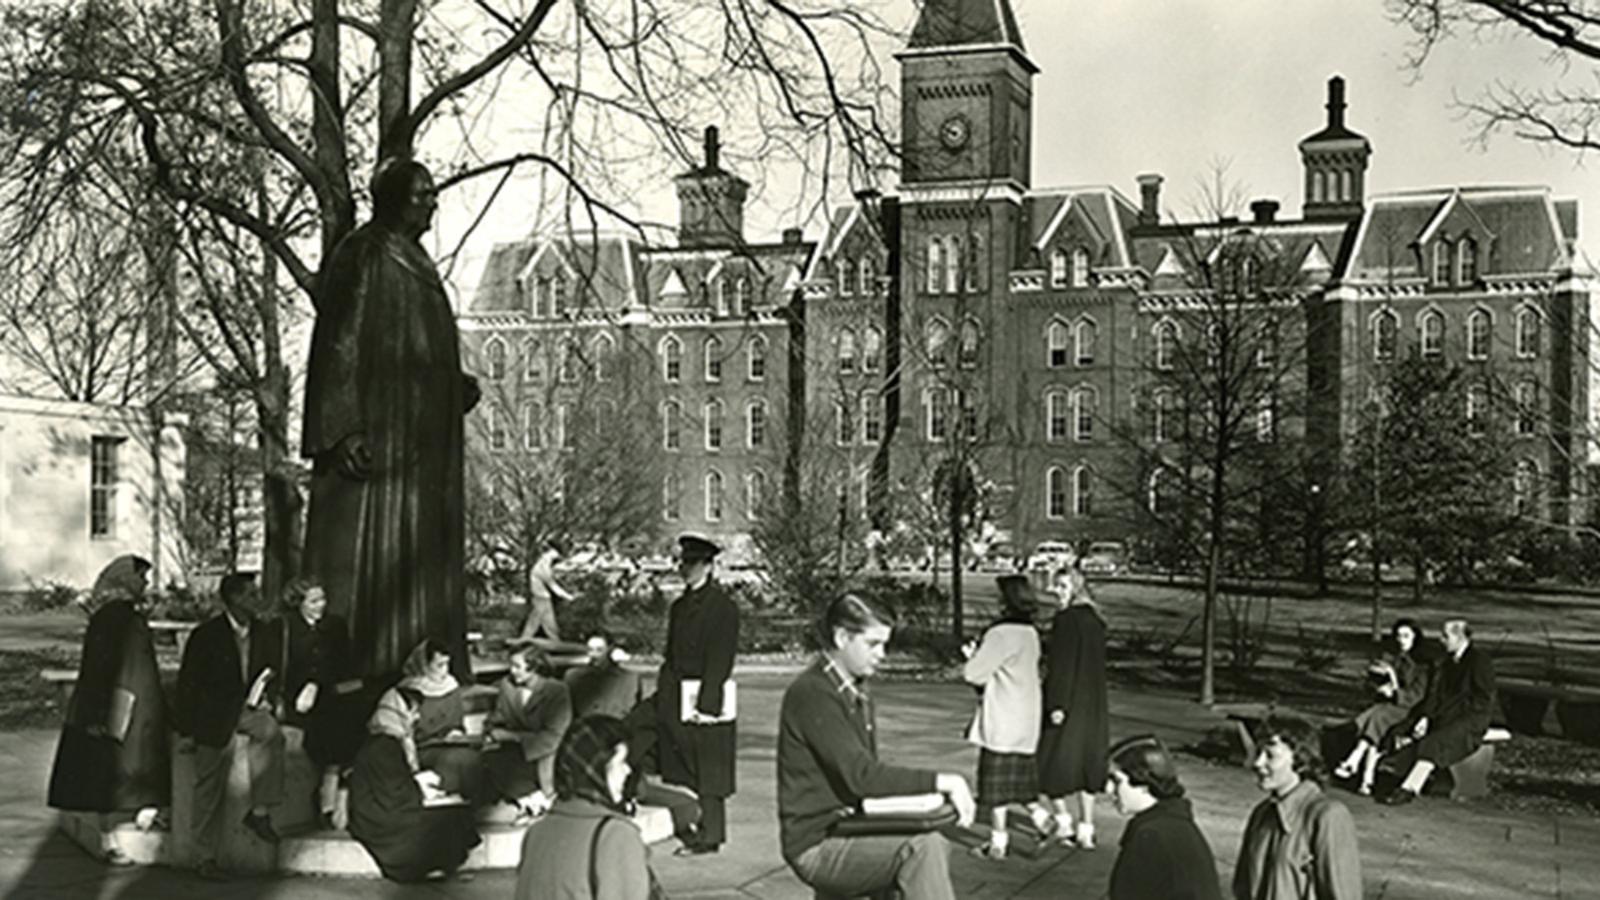 Students hanging out outside of University Hall in the 1940s